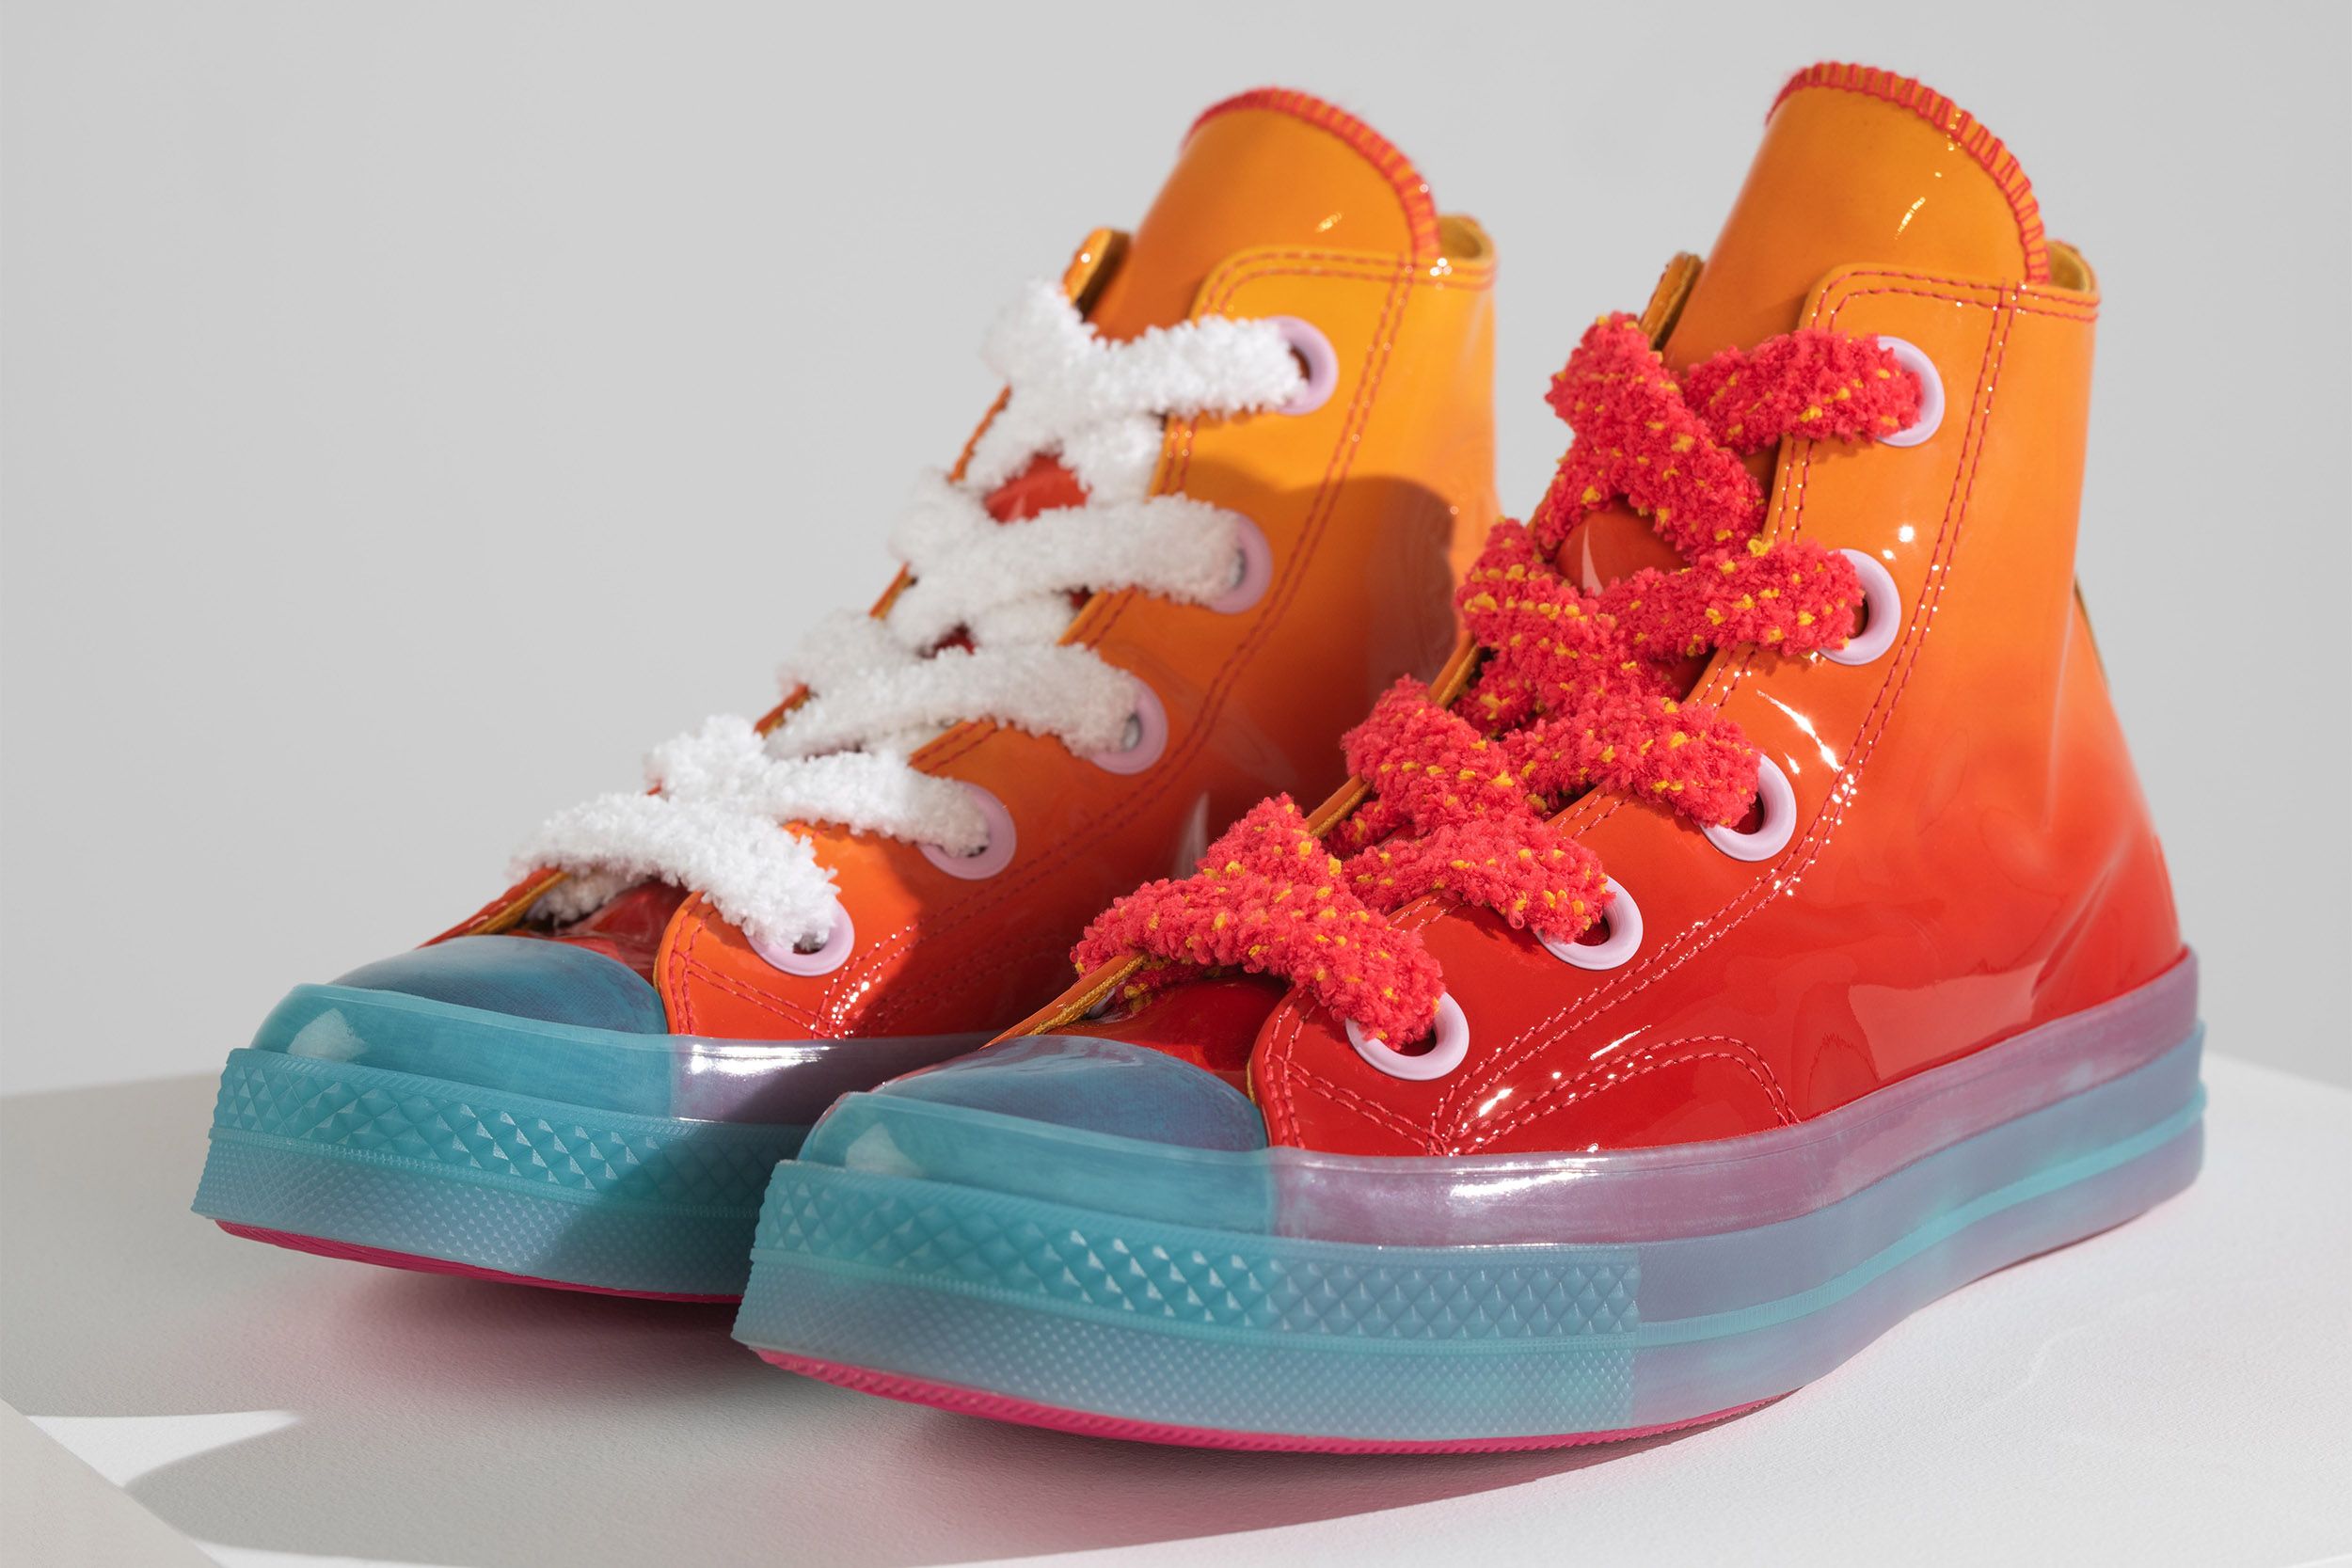 JW Anderson x Converse's Latest Is Damn Fun and Stylish